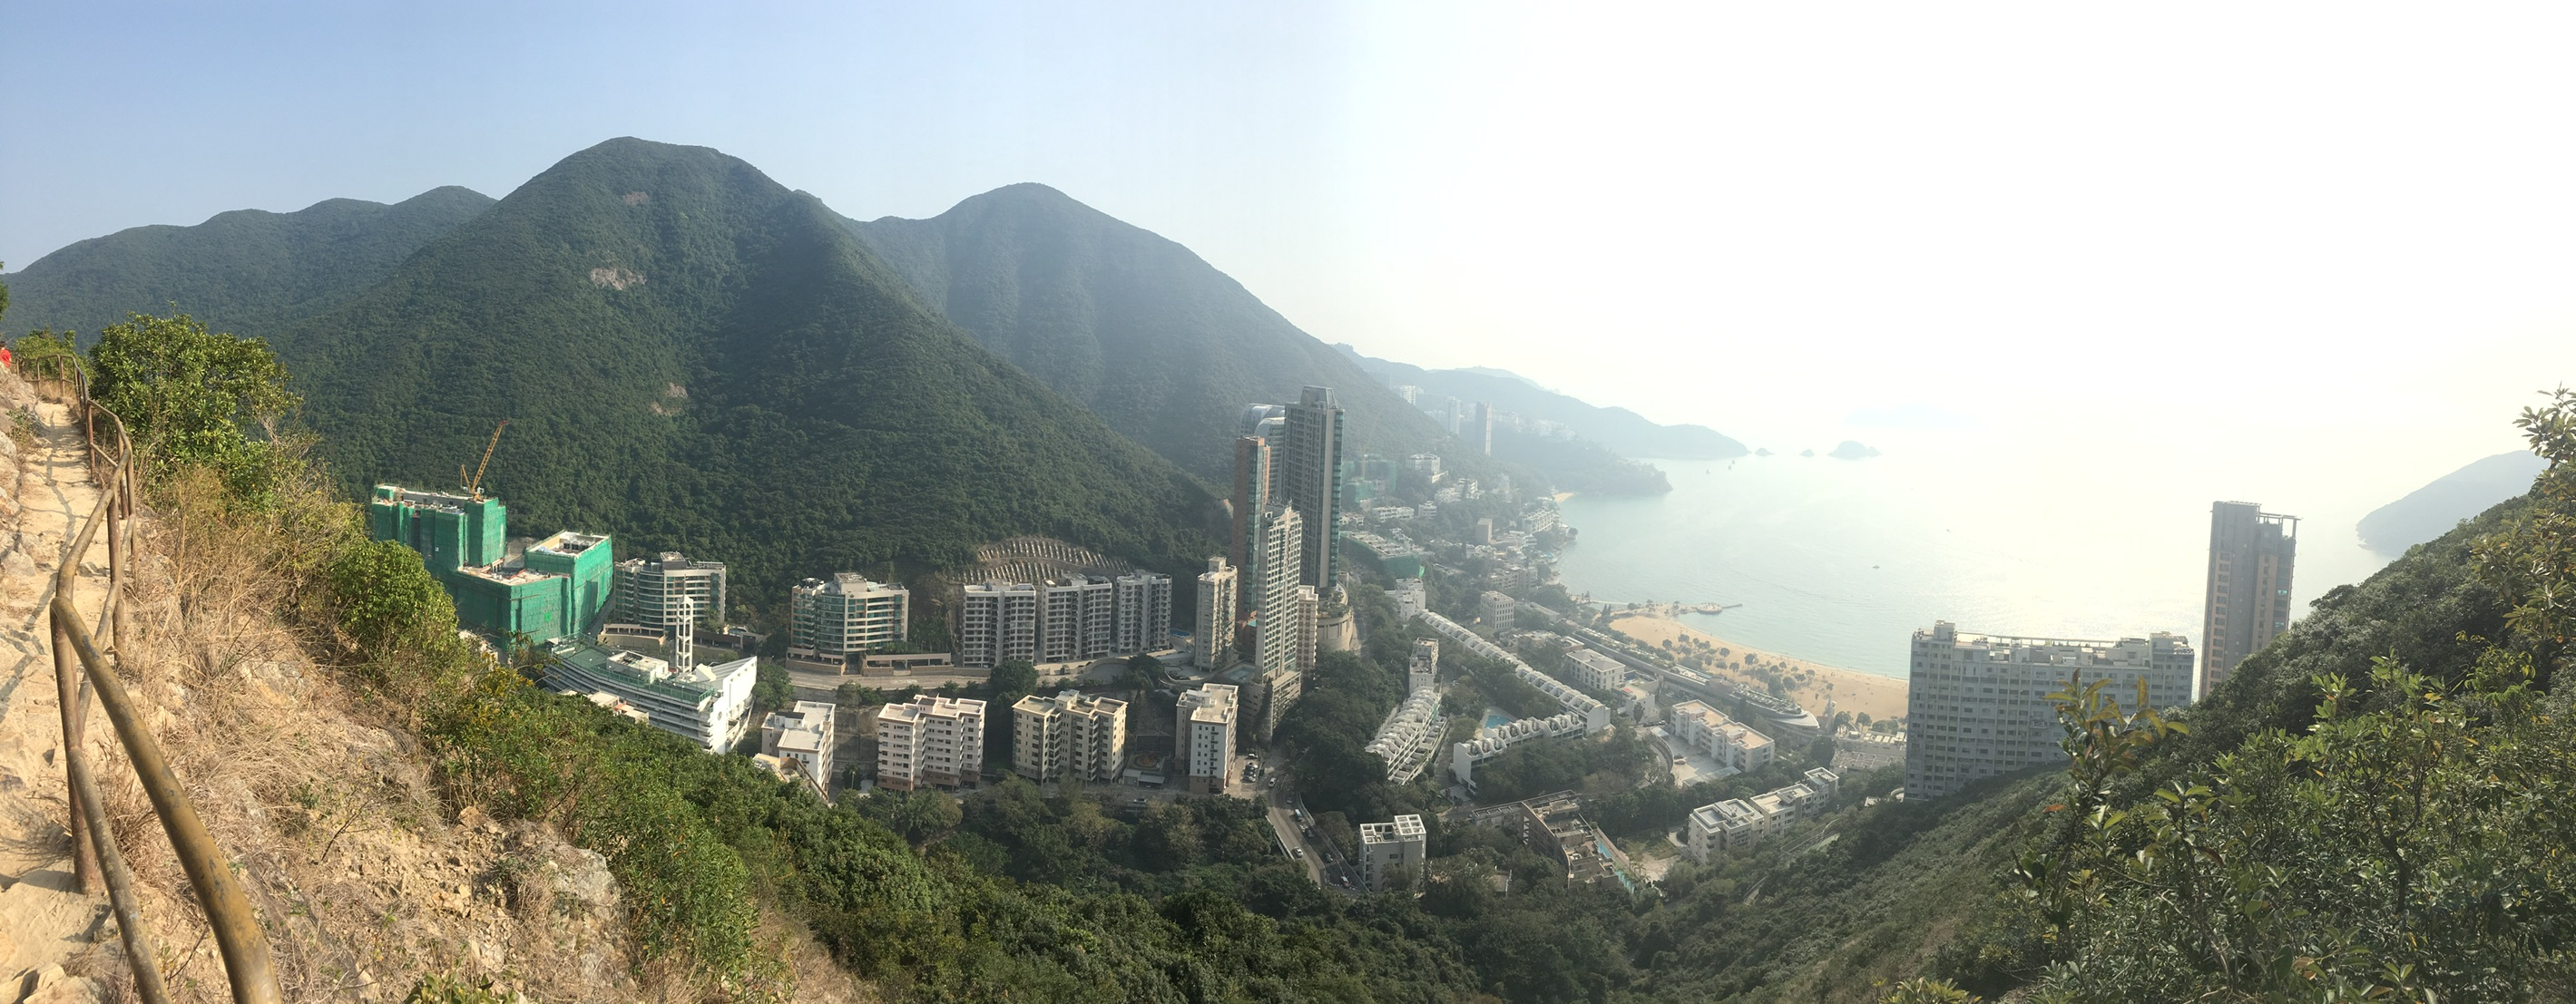 View of Repulse Bay from the Hike